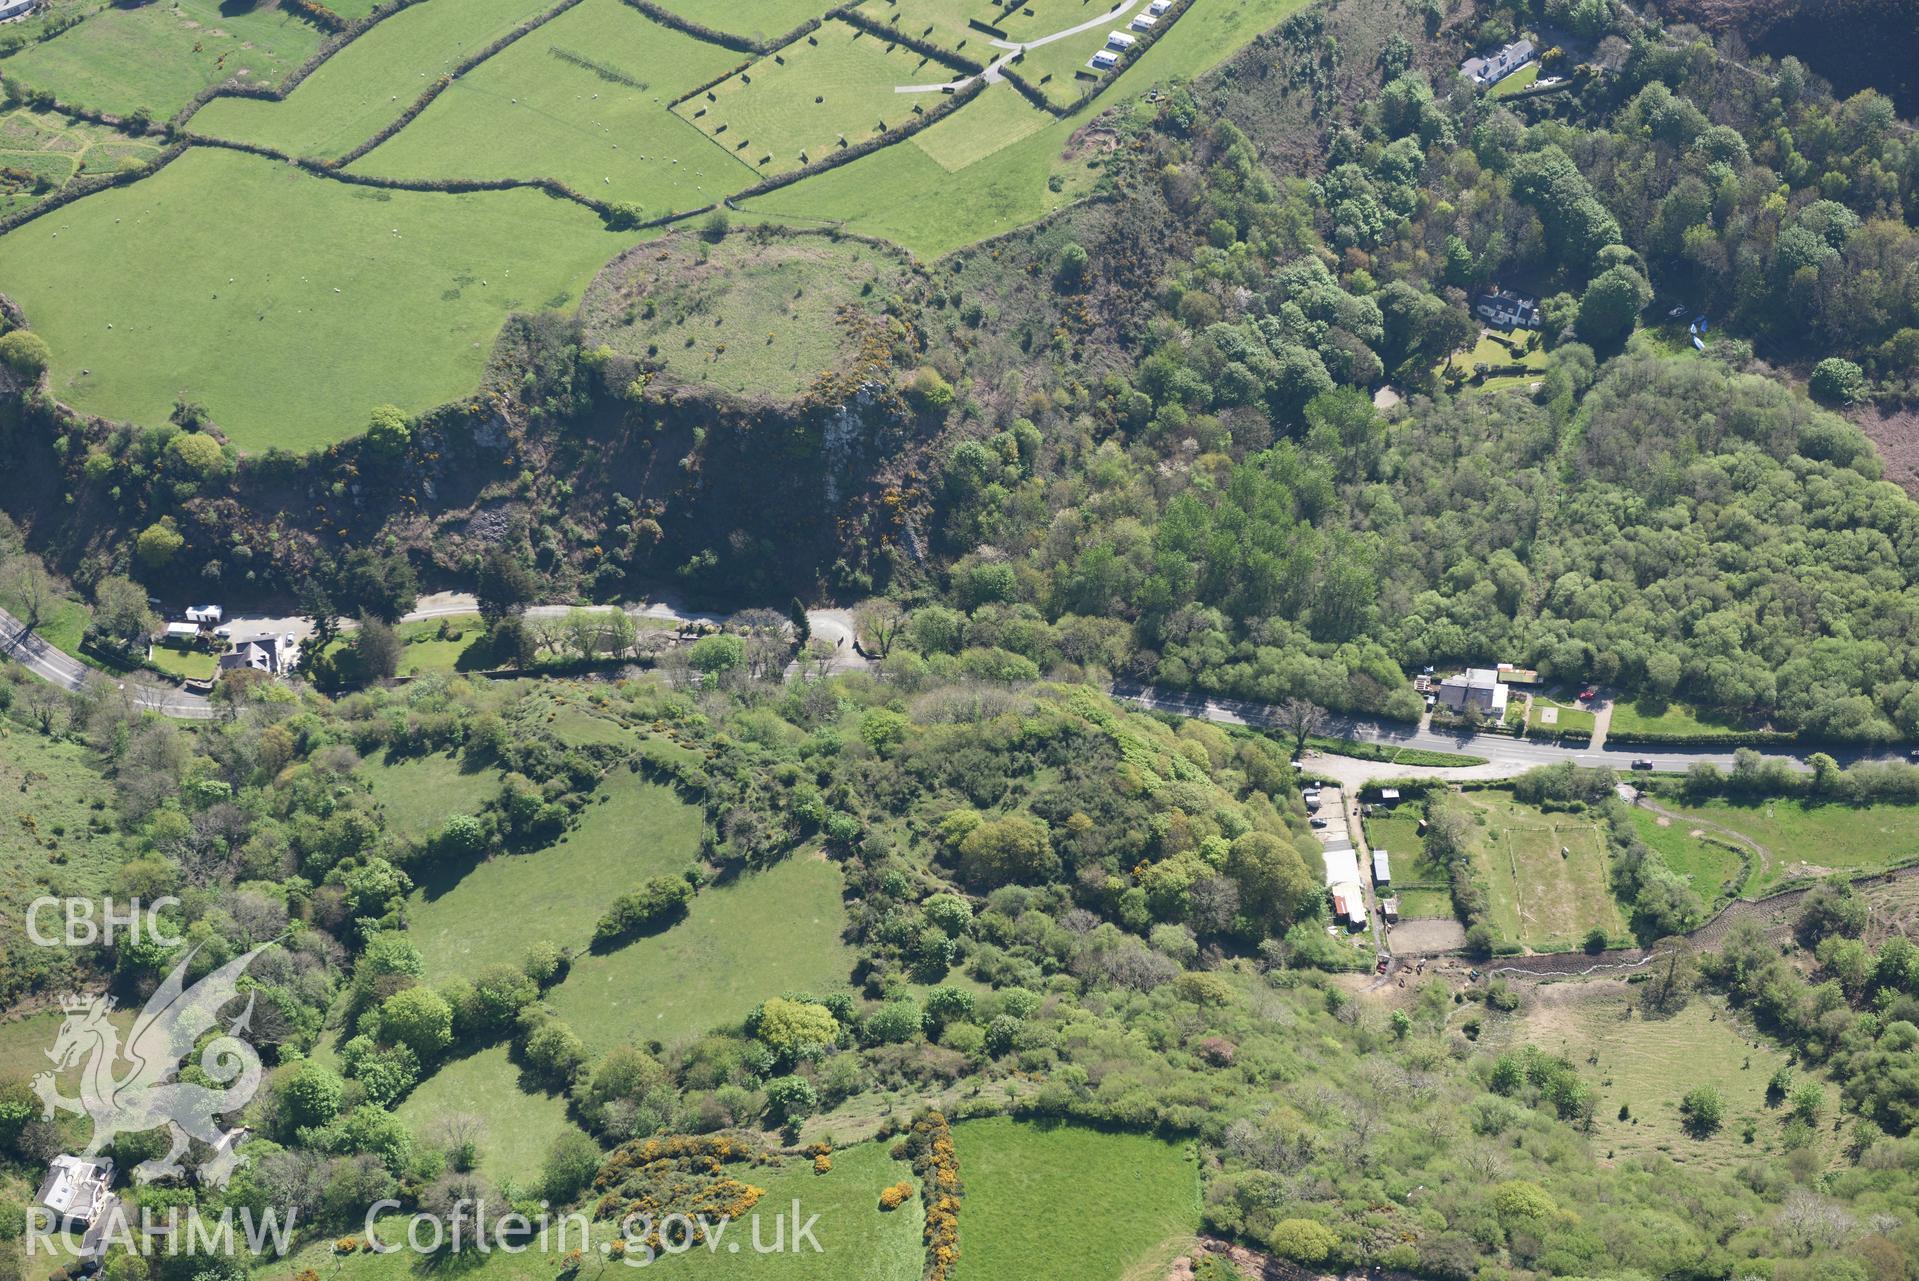 Aerial photography of nant Castell and Pen y Gaer taken on 3rd May 2017.  Baseline aerial reconnaissance survey for the CHERISH Project. ? Crown: CHERISH PROJECT 2017. Produced with EU funds through the Ireland Wales Co-operation Programme 2014-2020. All